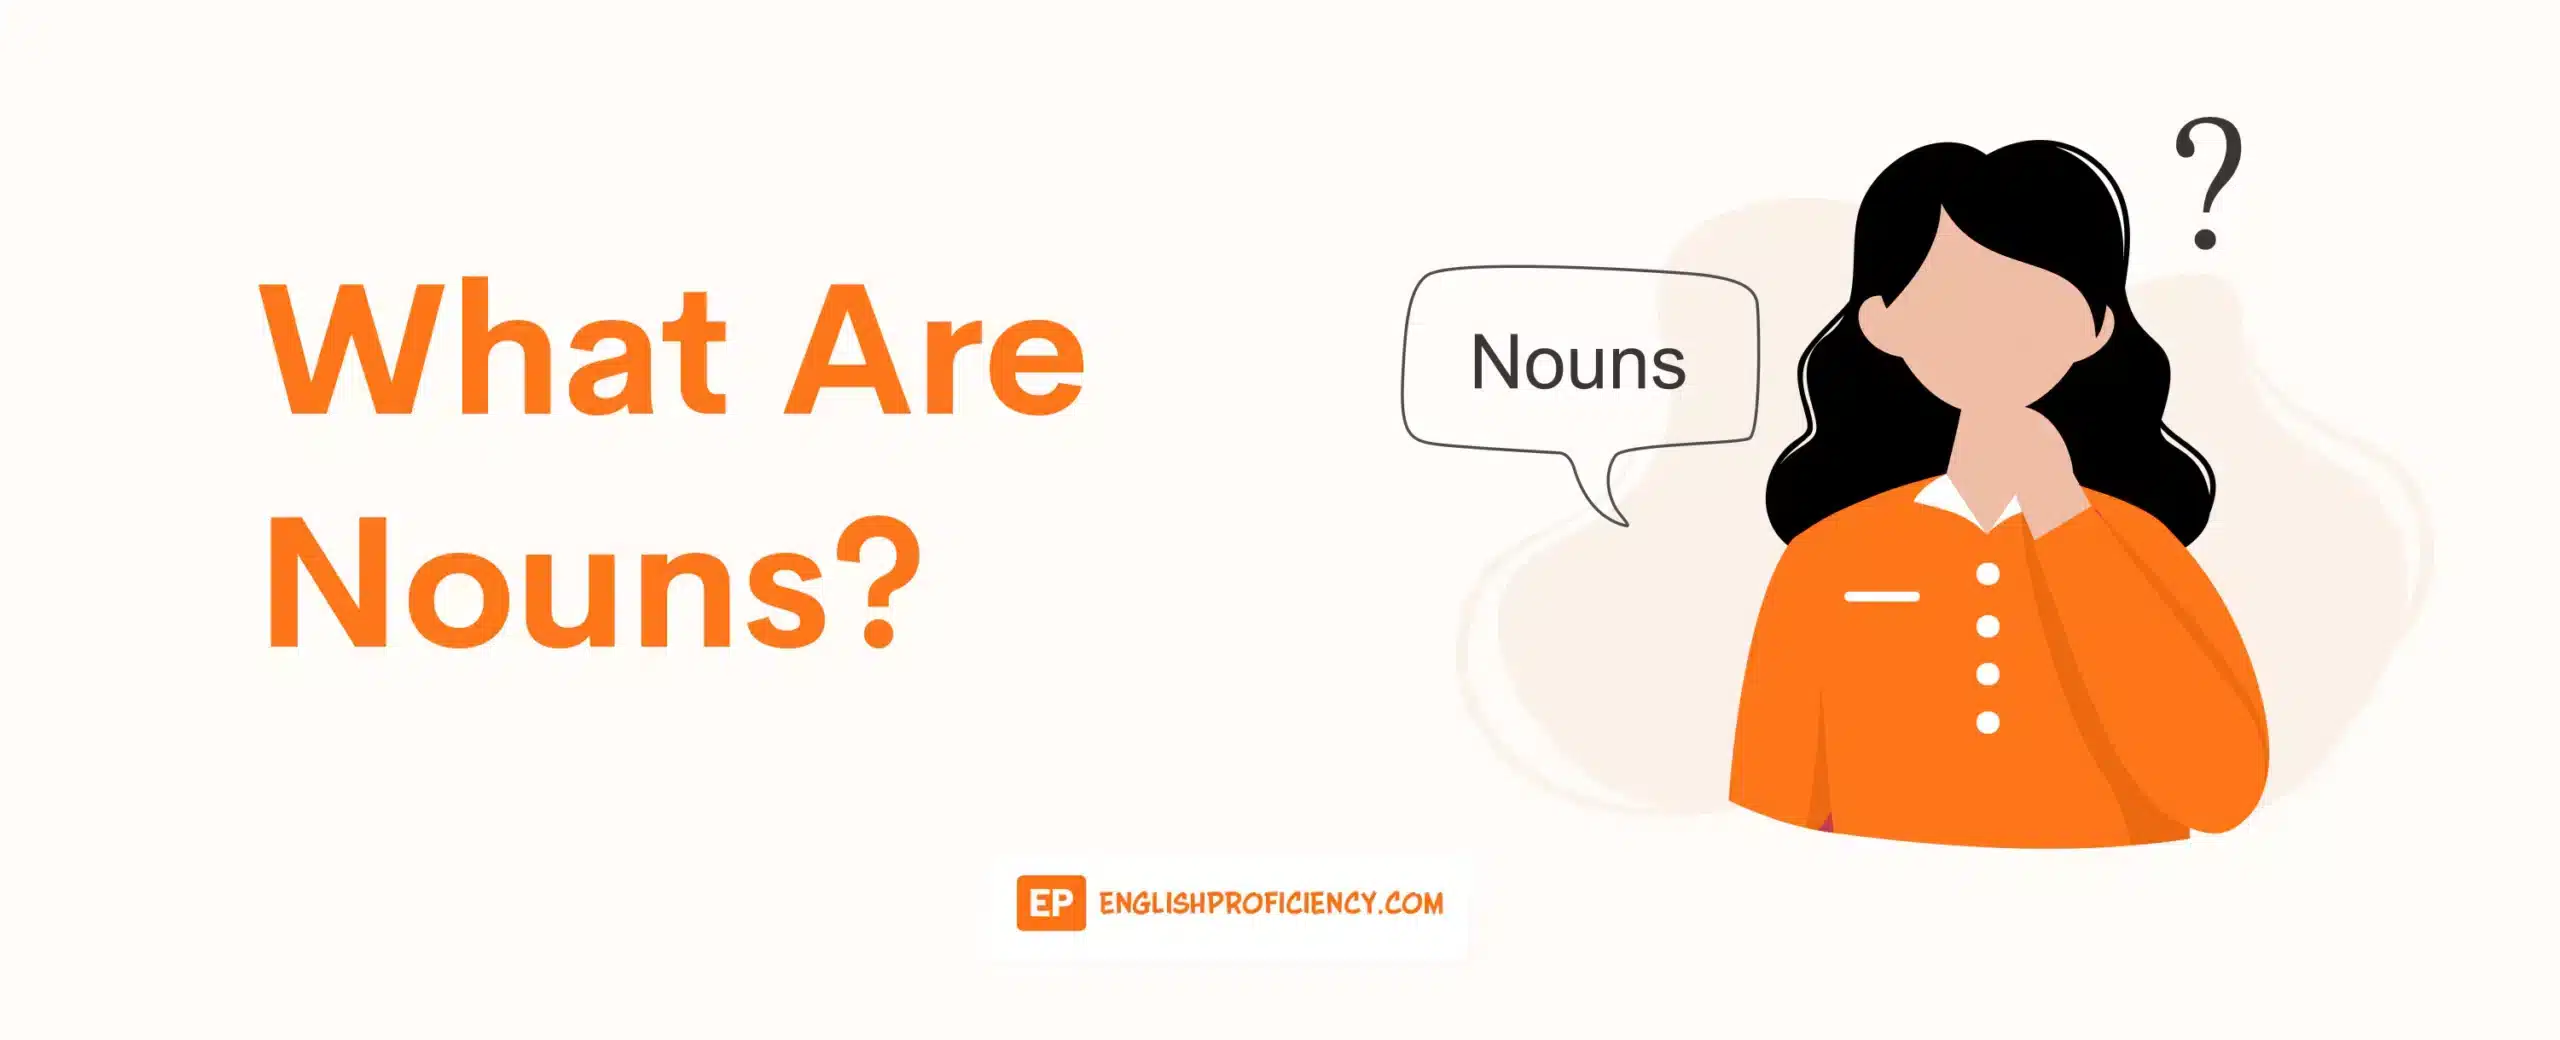 What Are Nouns